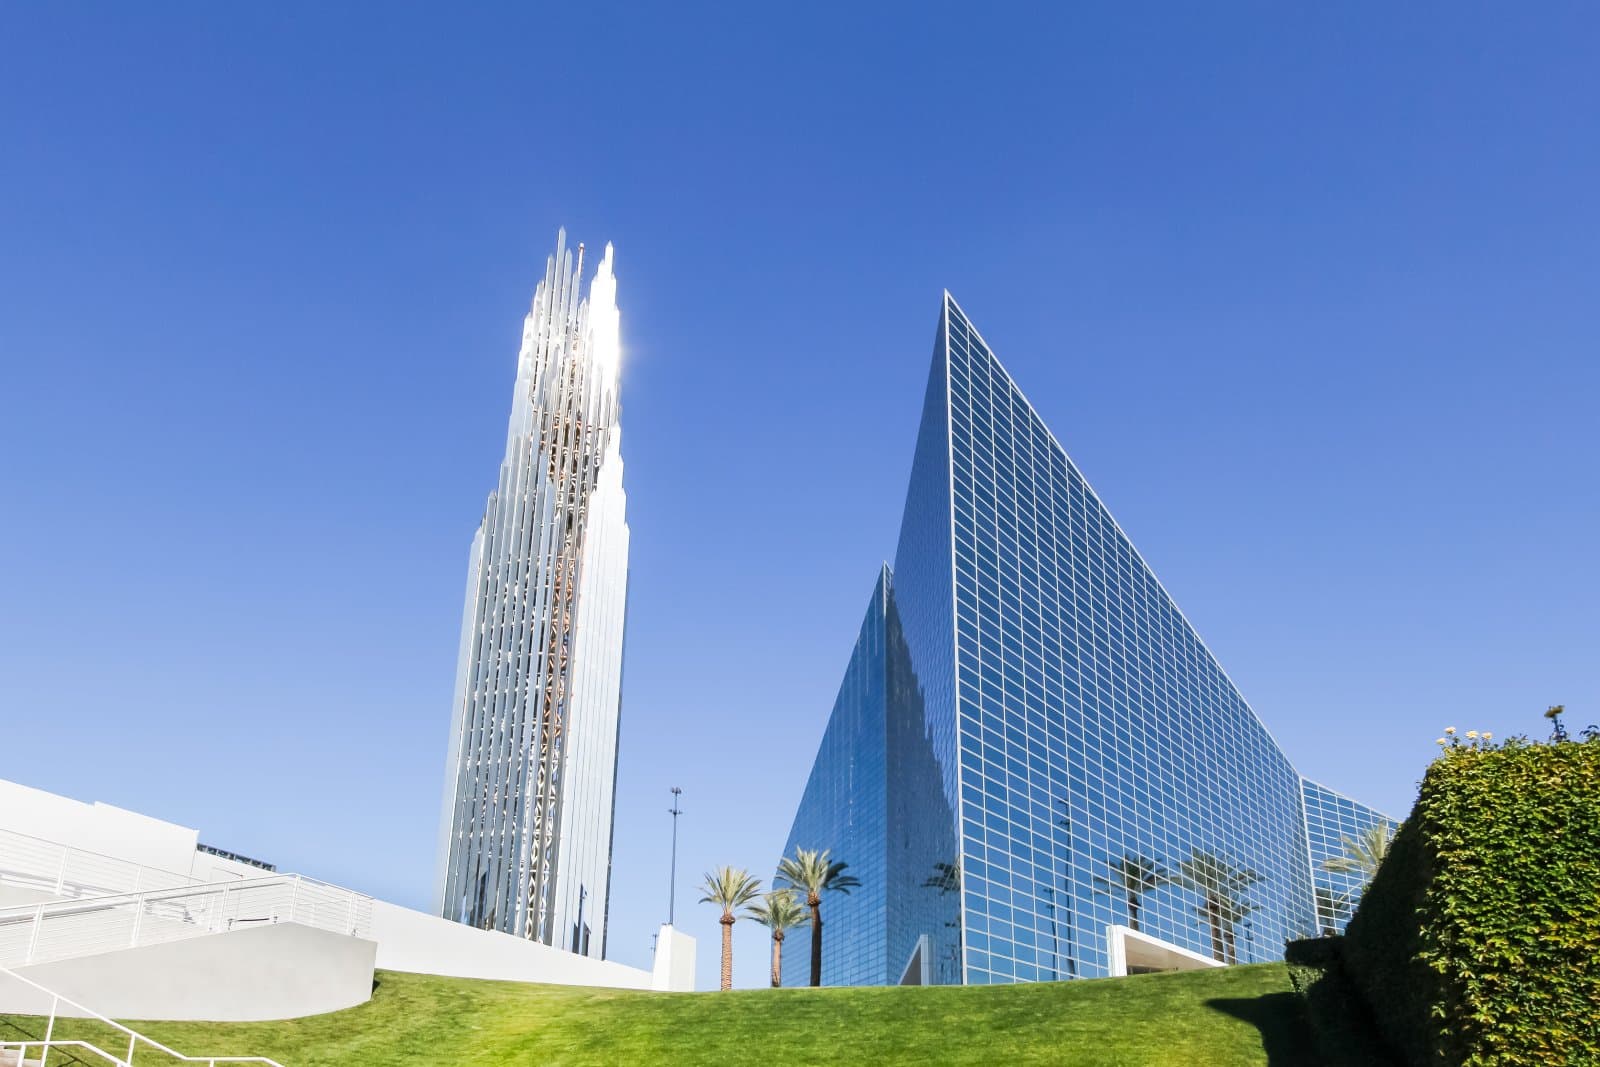 Image Credit: Shutterstock / The Image Party <p><span>Known for its striking glass structure and as the home of the Hour of Power broadcast, this architectural marvel in Garden Grove symbolizes transparency and enlightenment in faith.</span></p>